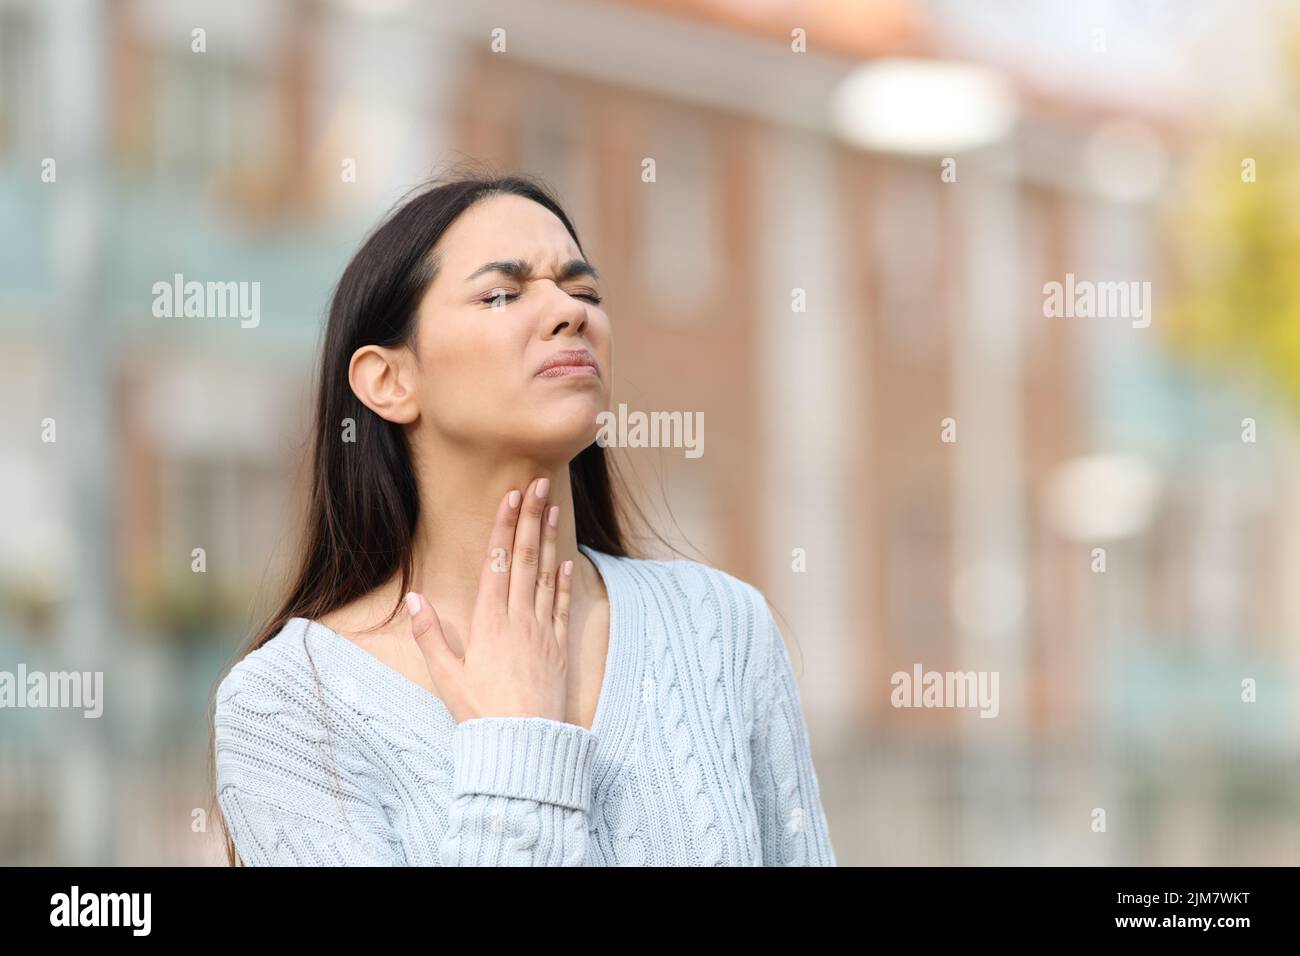 Stressed woman suffering sore throat standing in the street Stock Photo